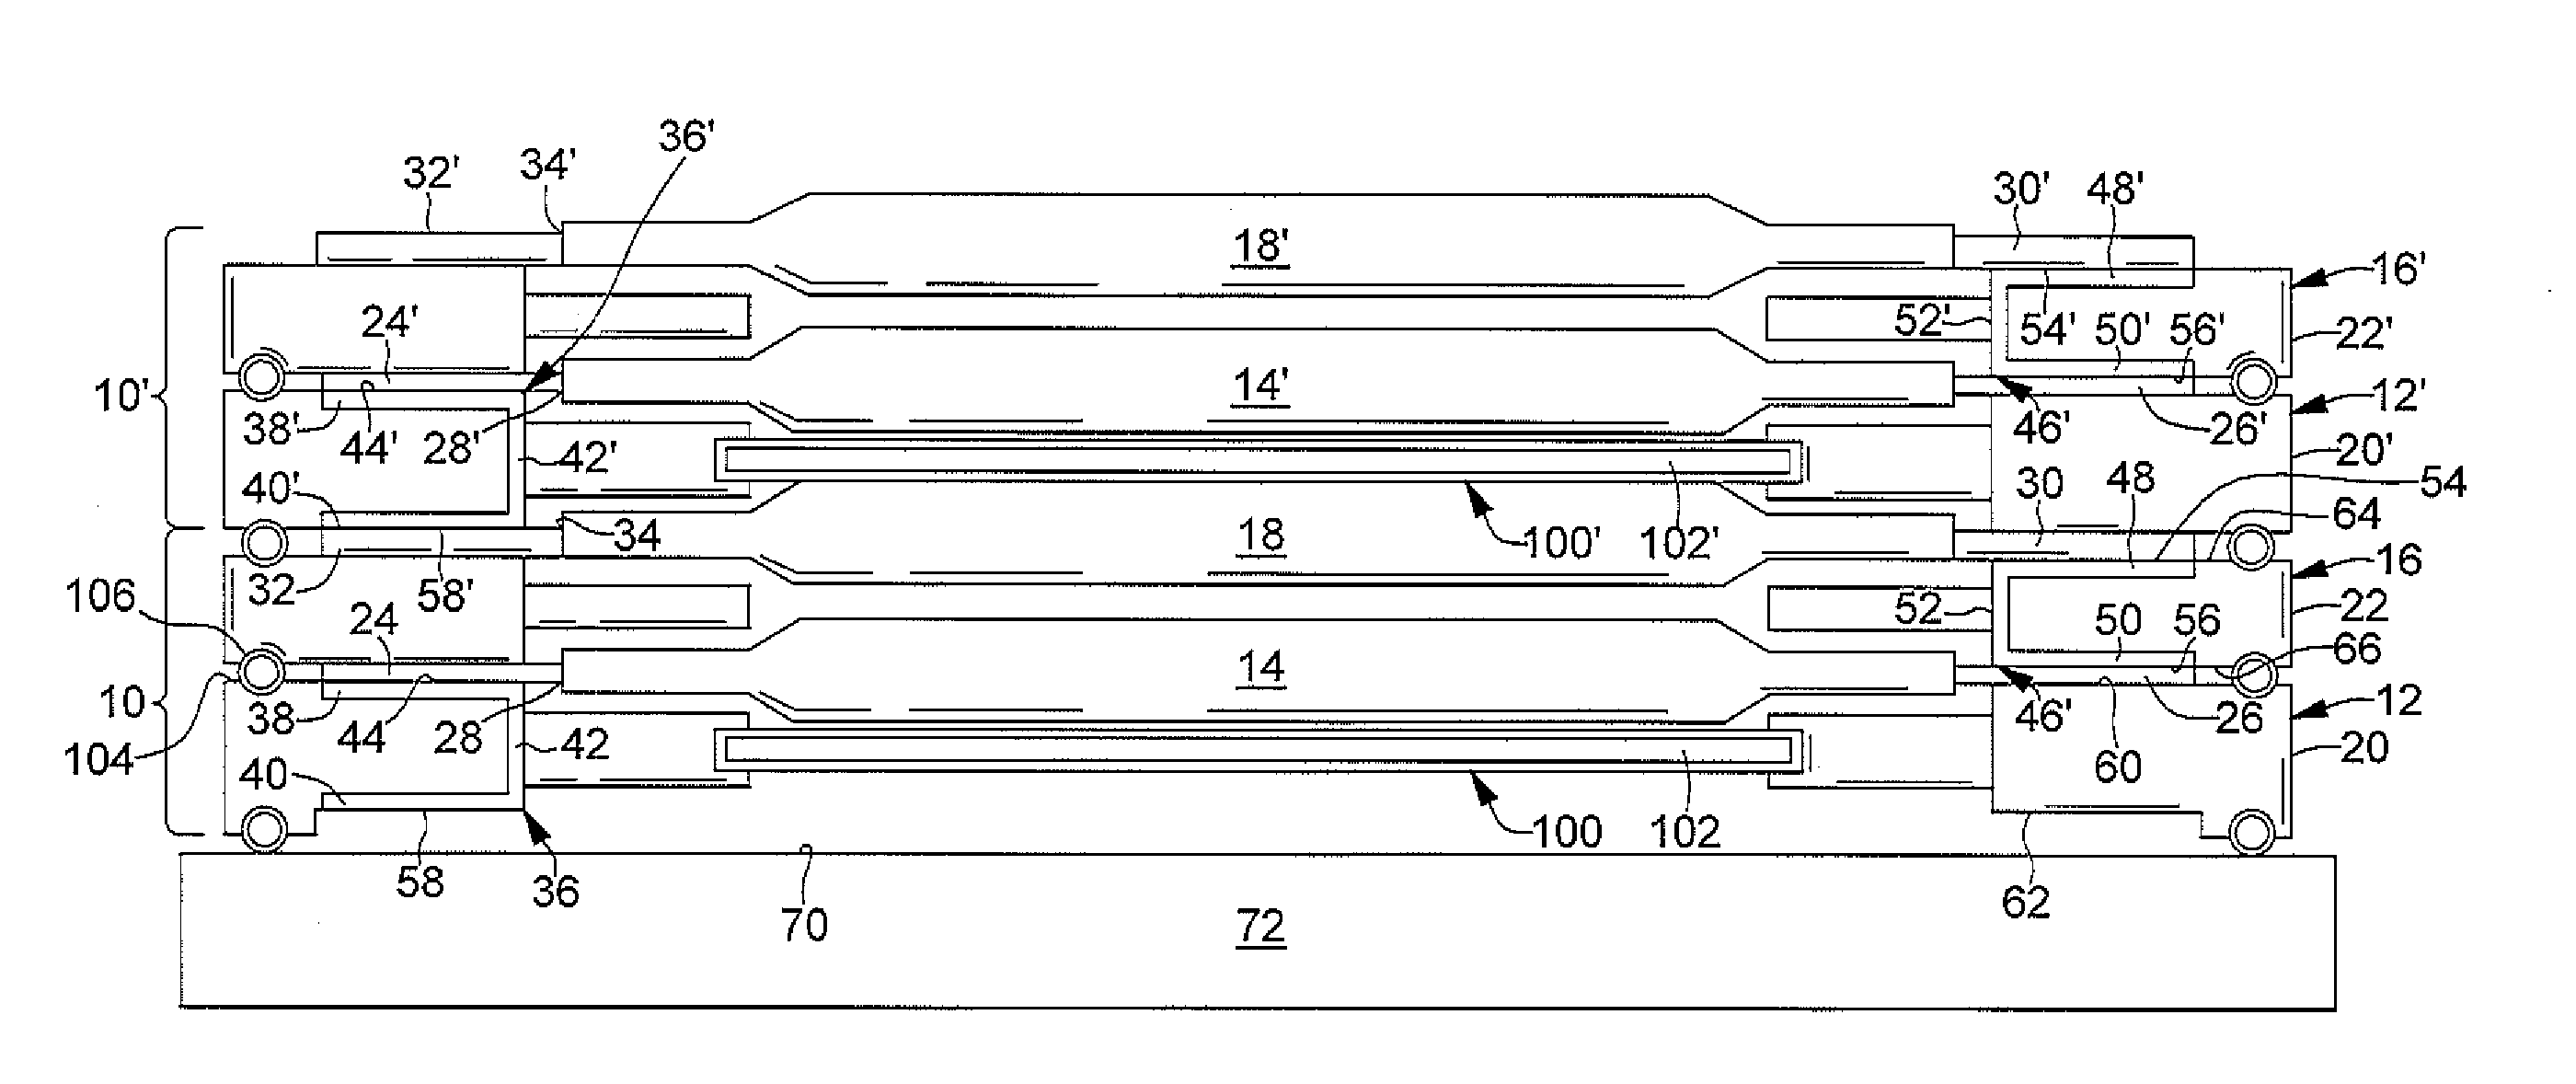 Repeating frame battery with compression joining of cell tabs to welded connection terminals